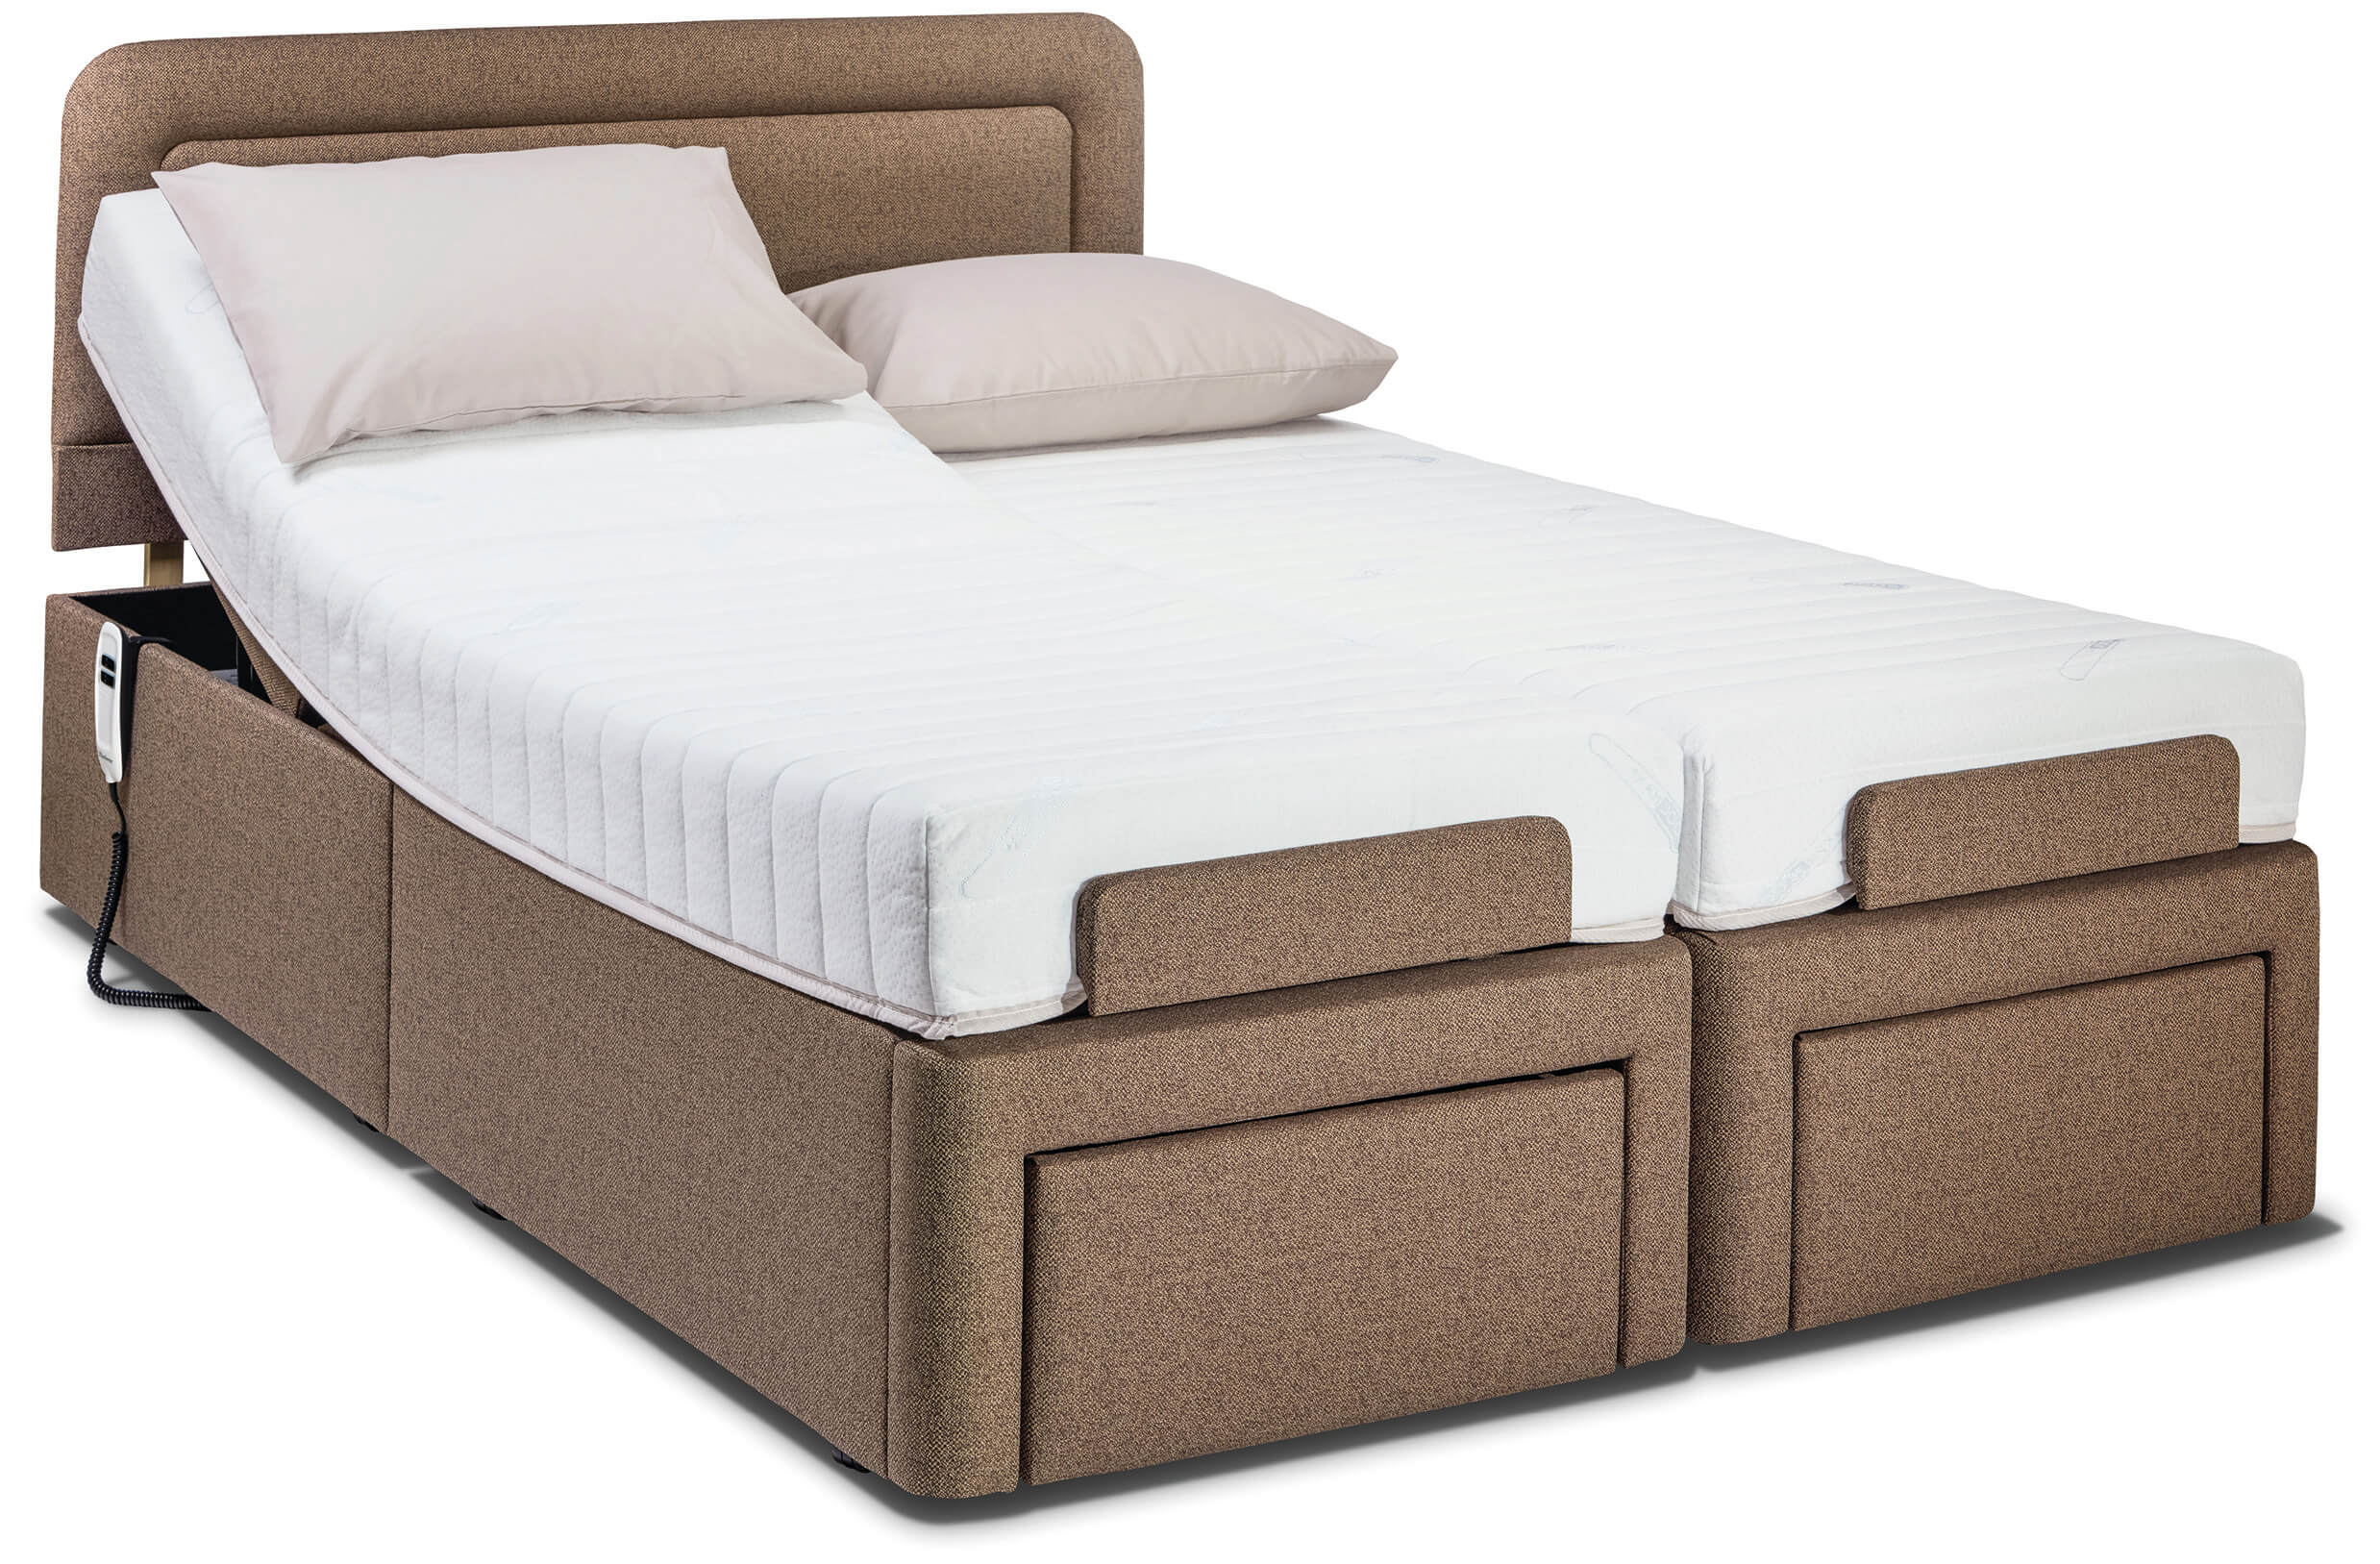 sears adjustable beds and mattresses